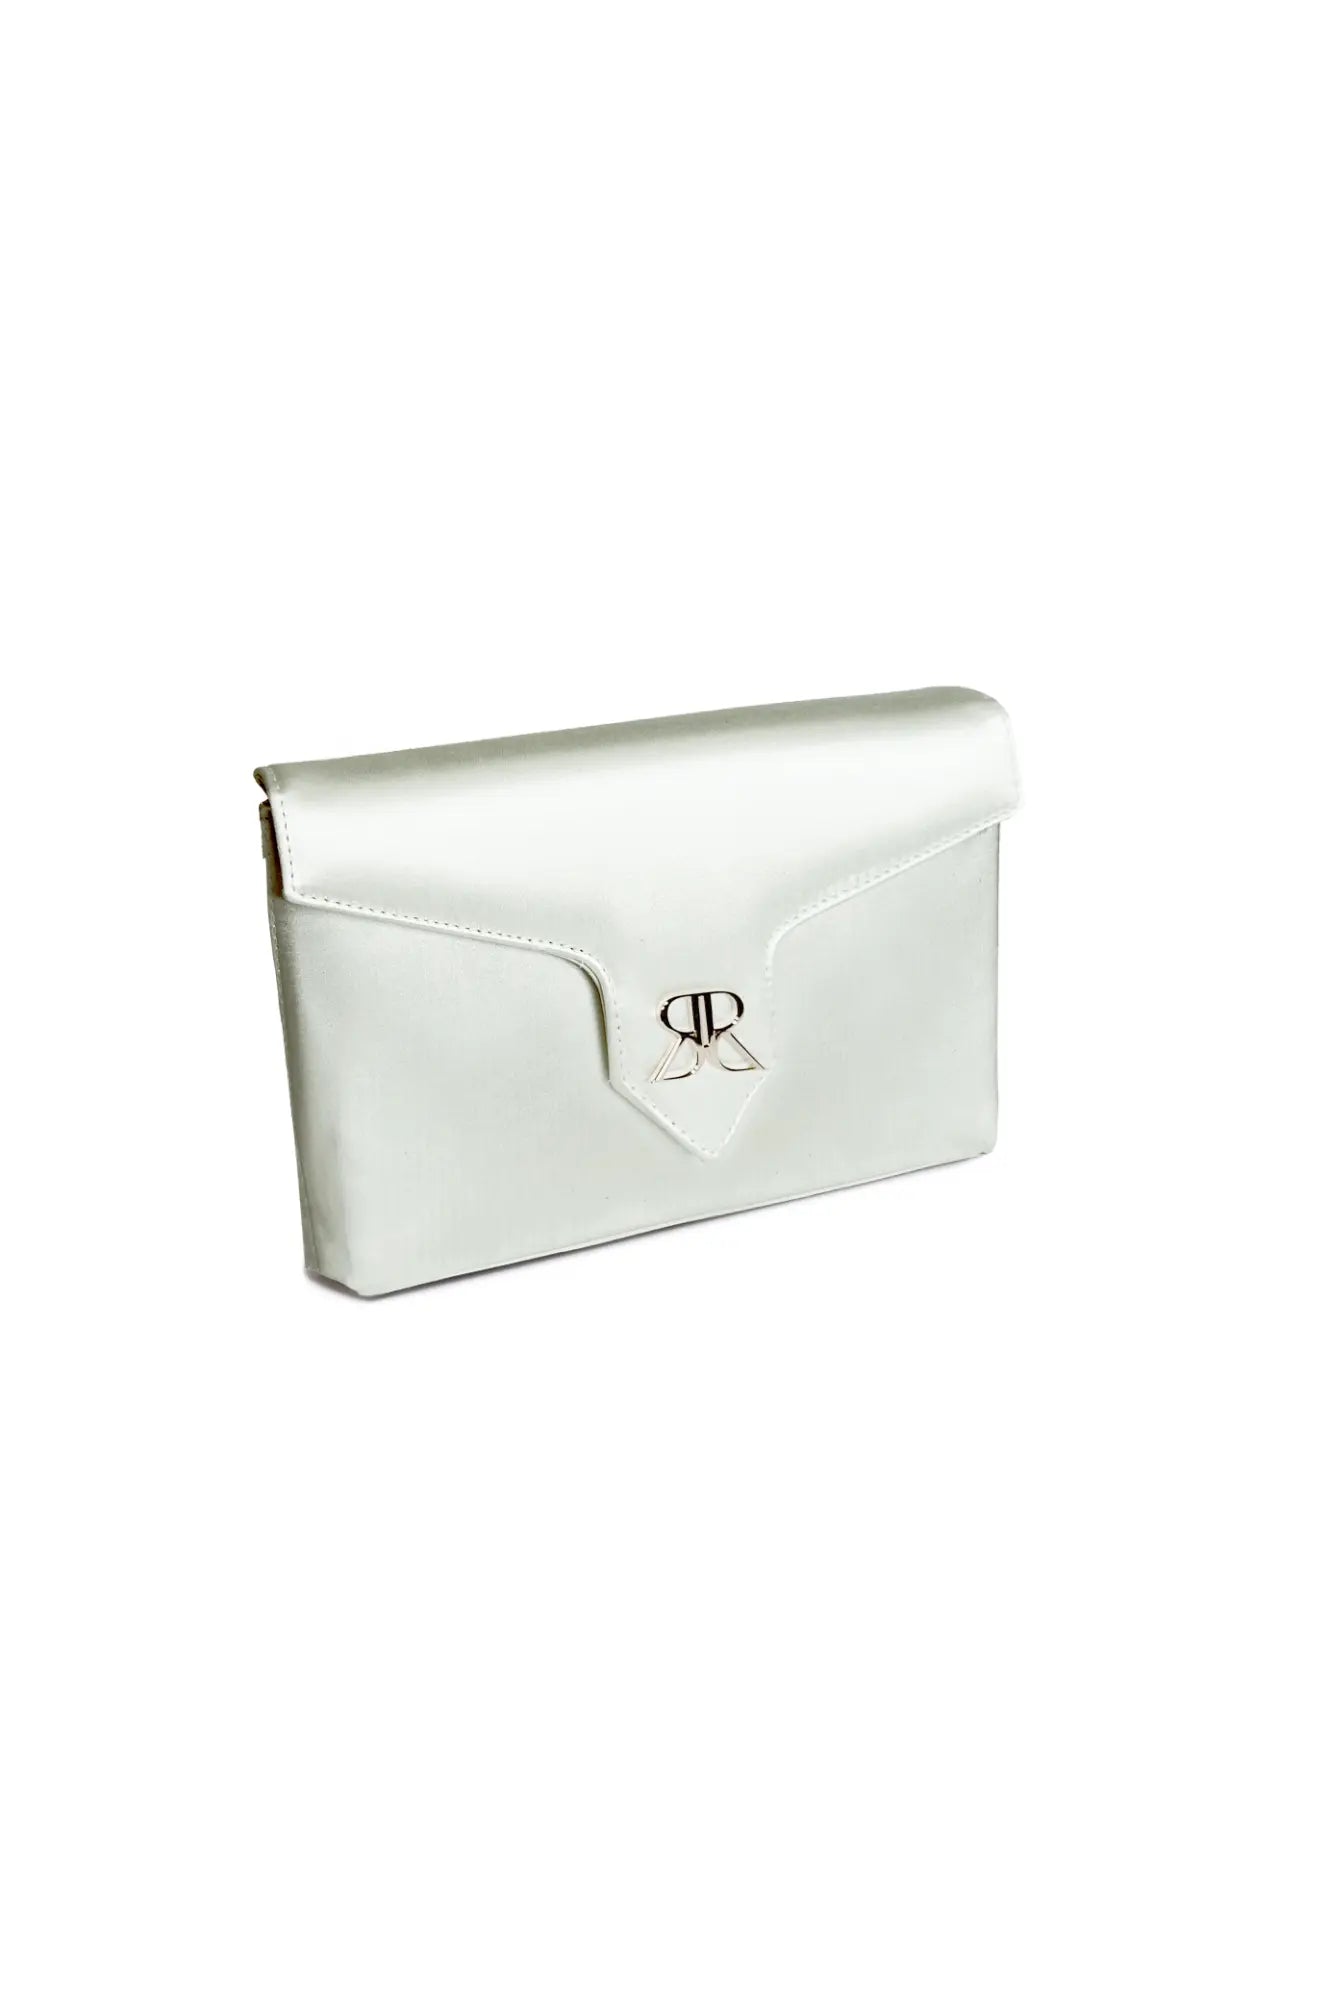 The Bella Rosa Collection Sage Green Love Note Envelope Clutch with a metallic logo clasp on a white background.